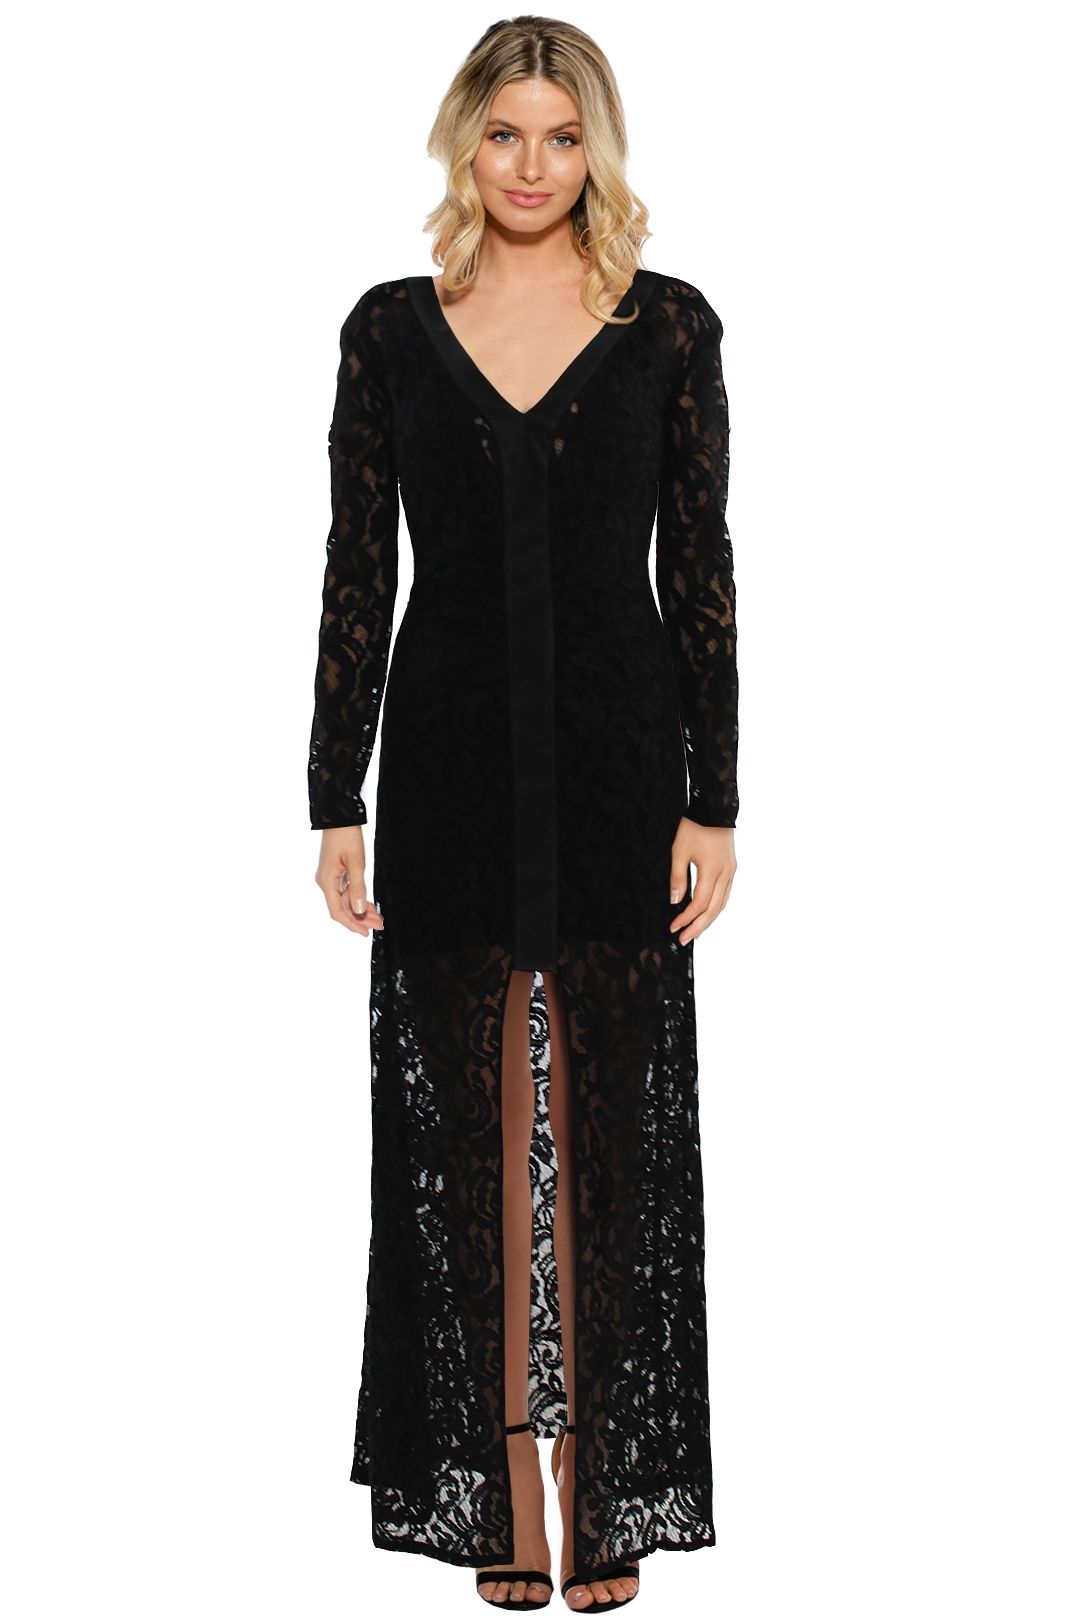 Bianca Spender - Persephone Gown - Black - Front